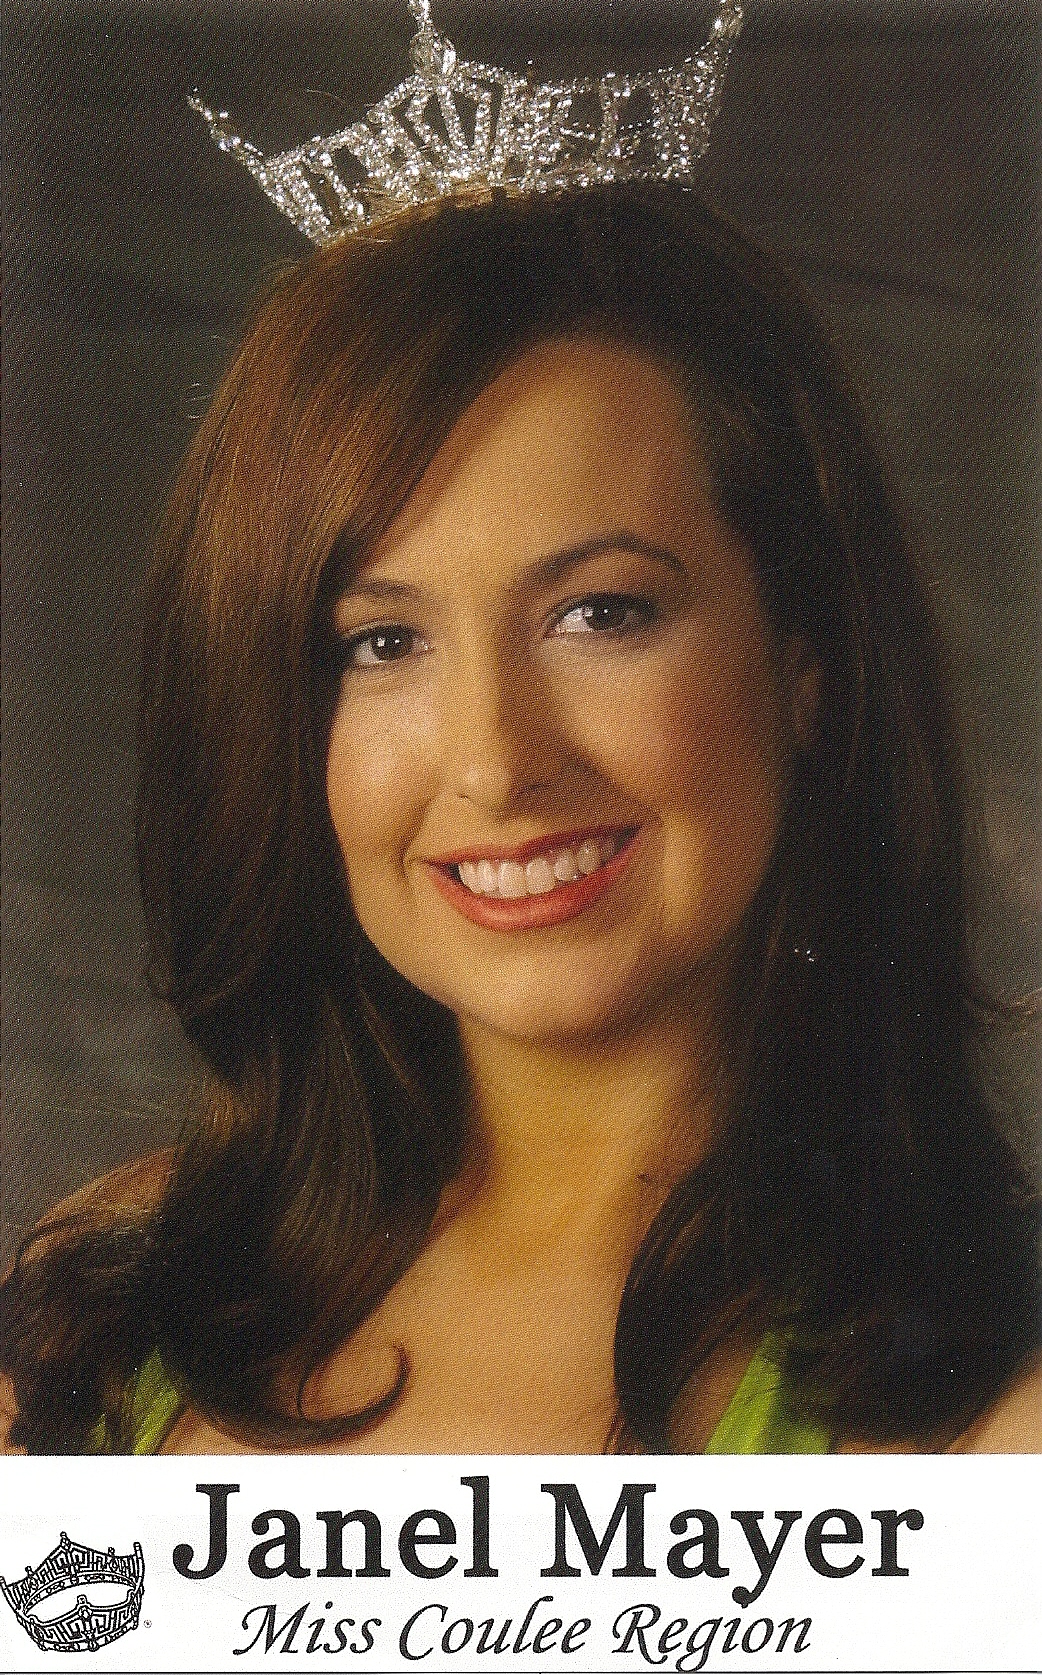 Janel Mayer, Miss Coulee Region